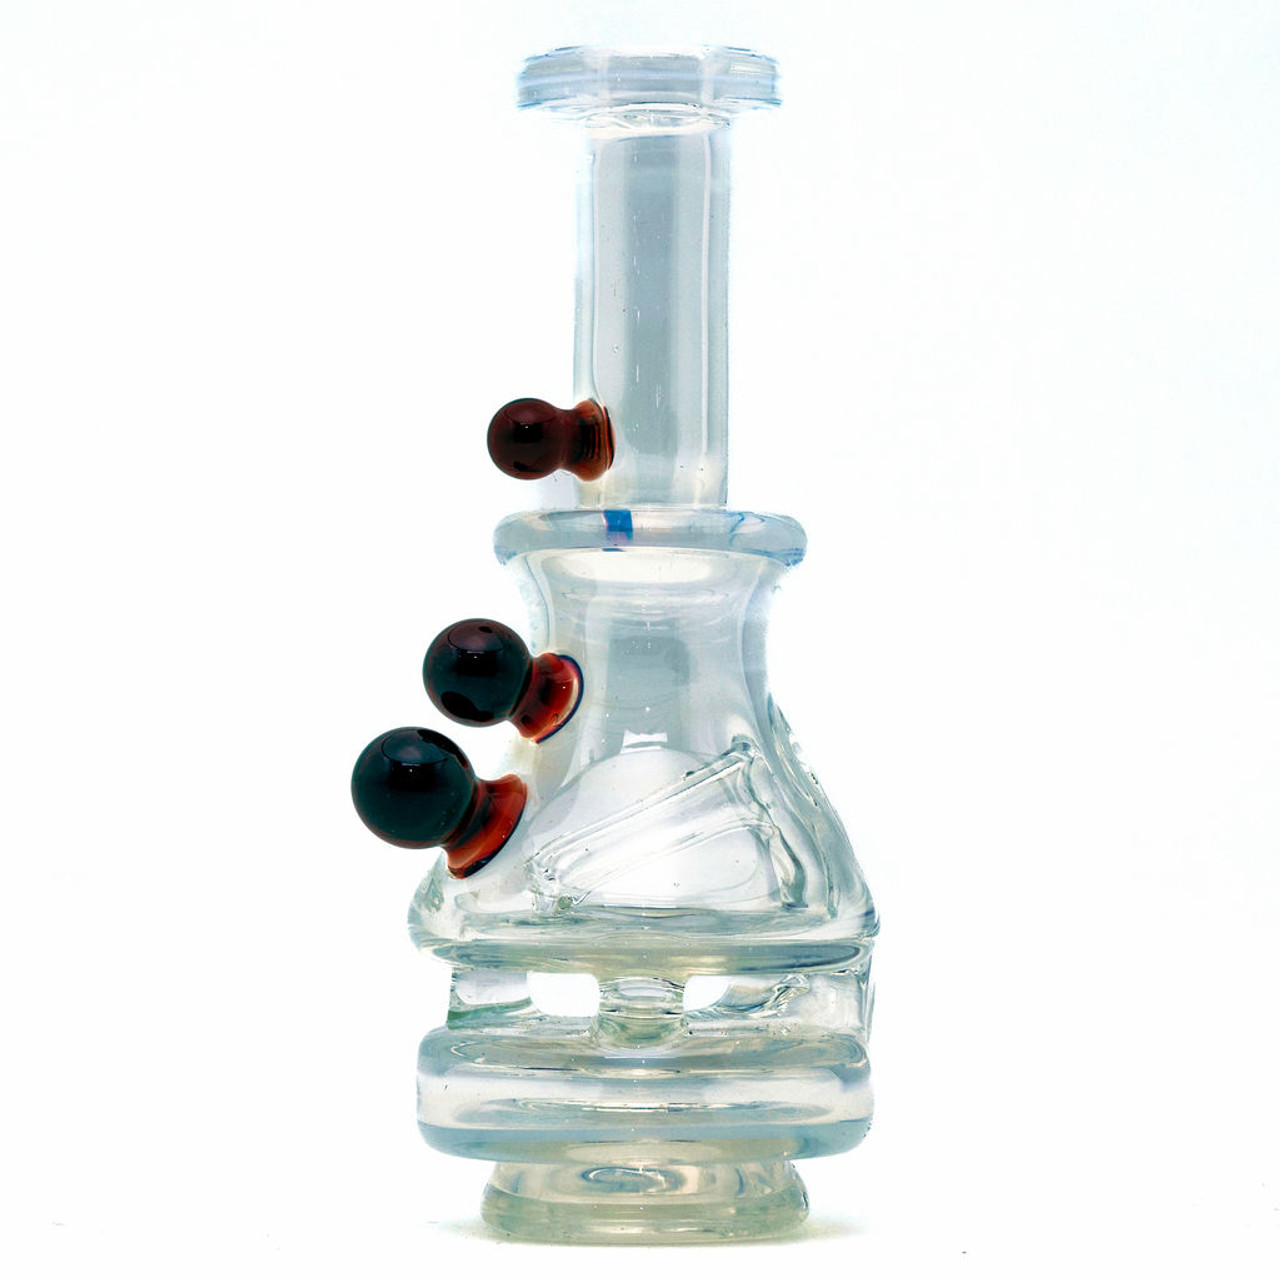 Elev8 Puffco Peak Replacement Color Top